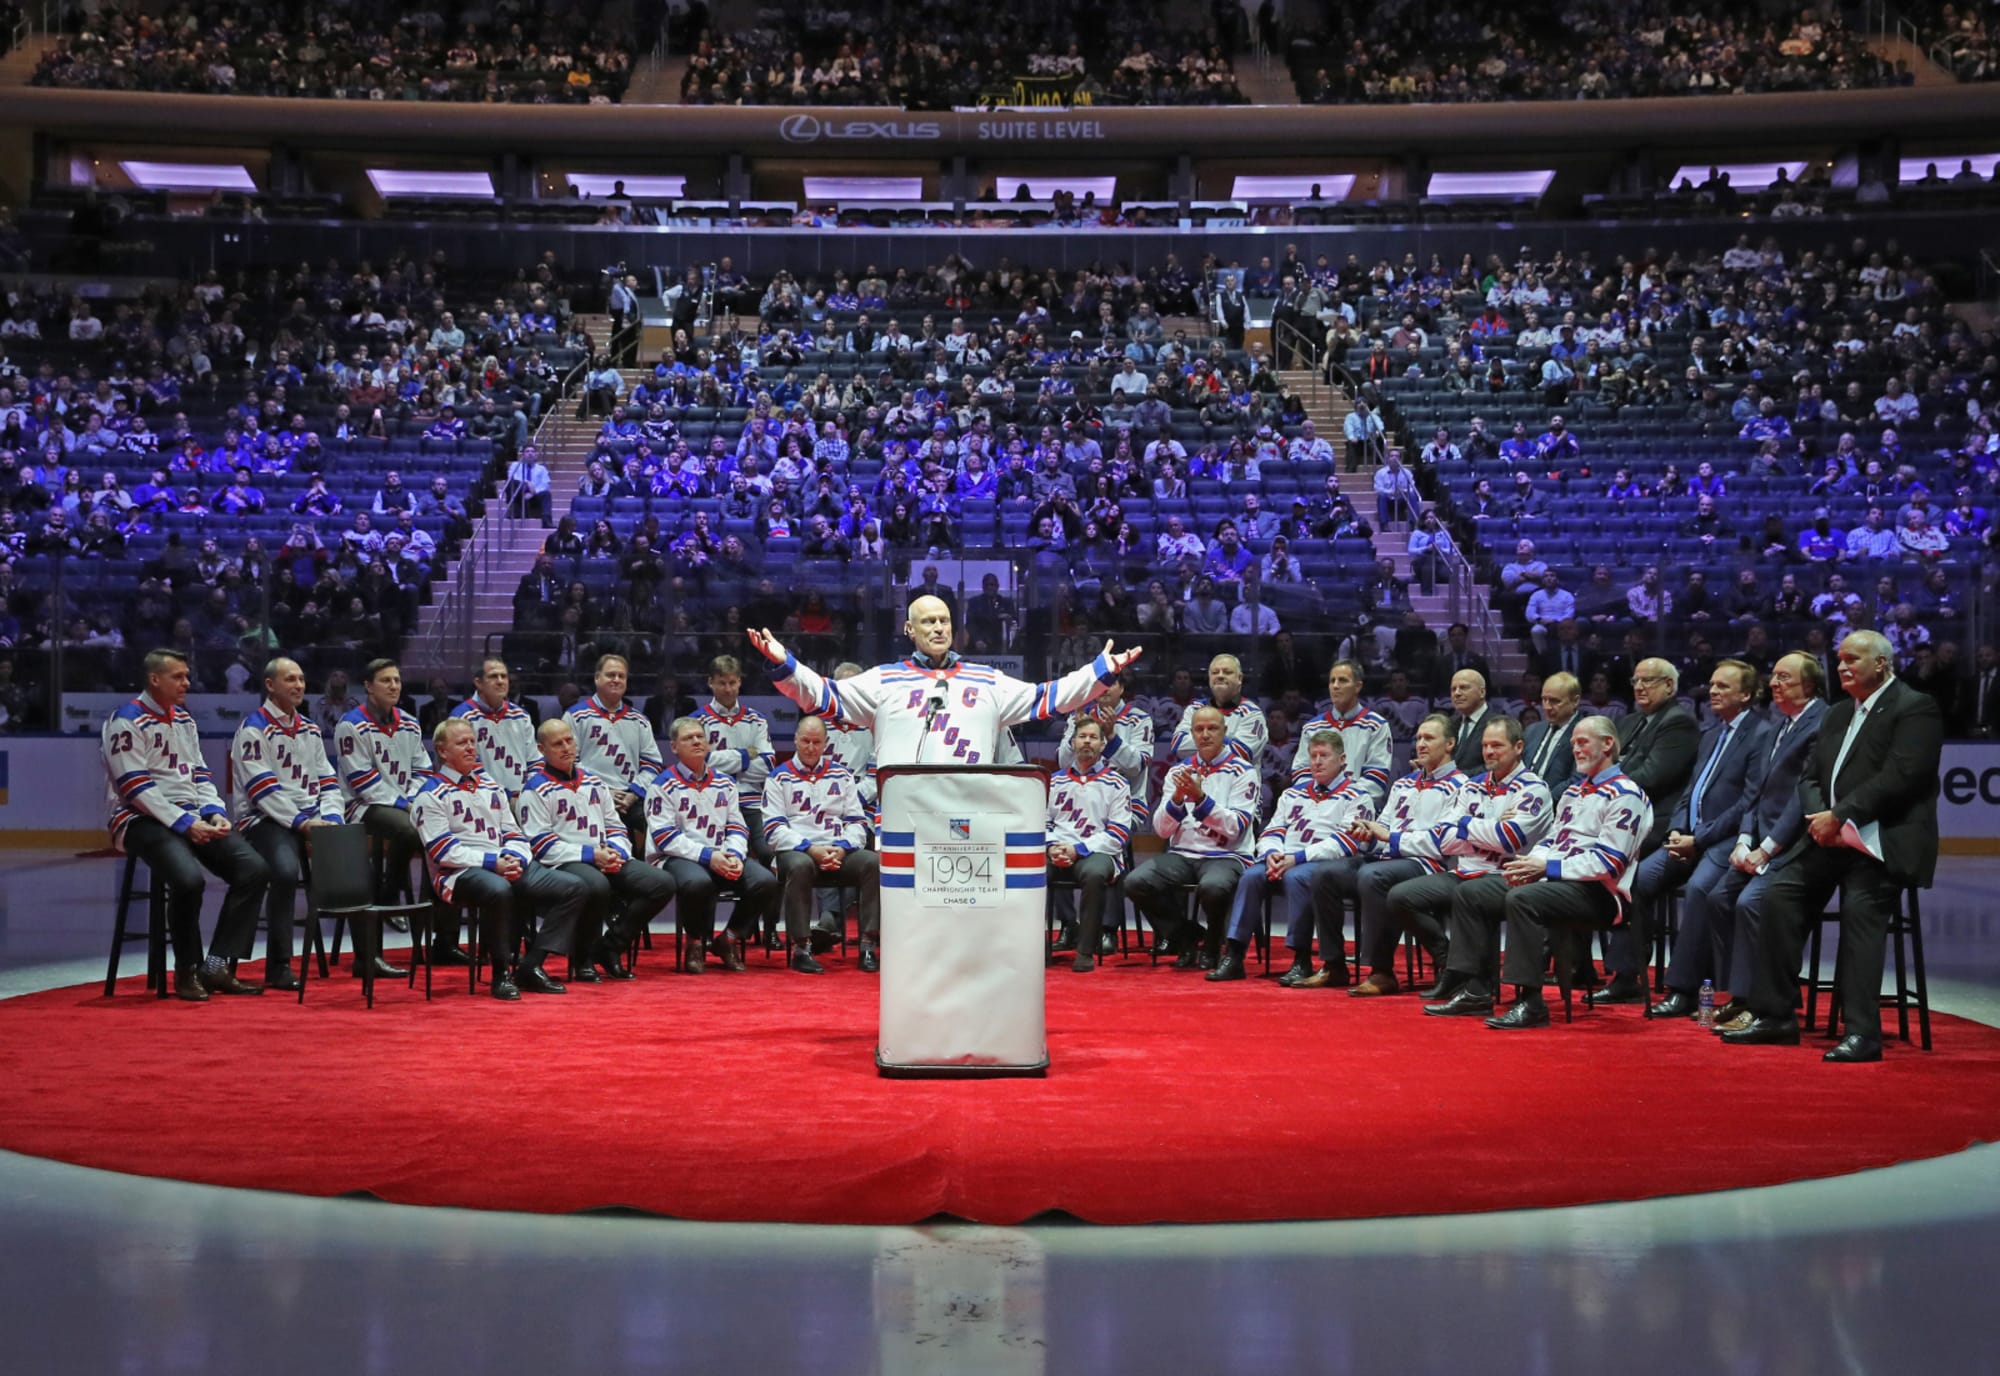 Rangers celebrate 25th anniversary of '94 Stanley Cup team